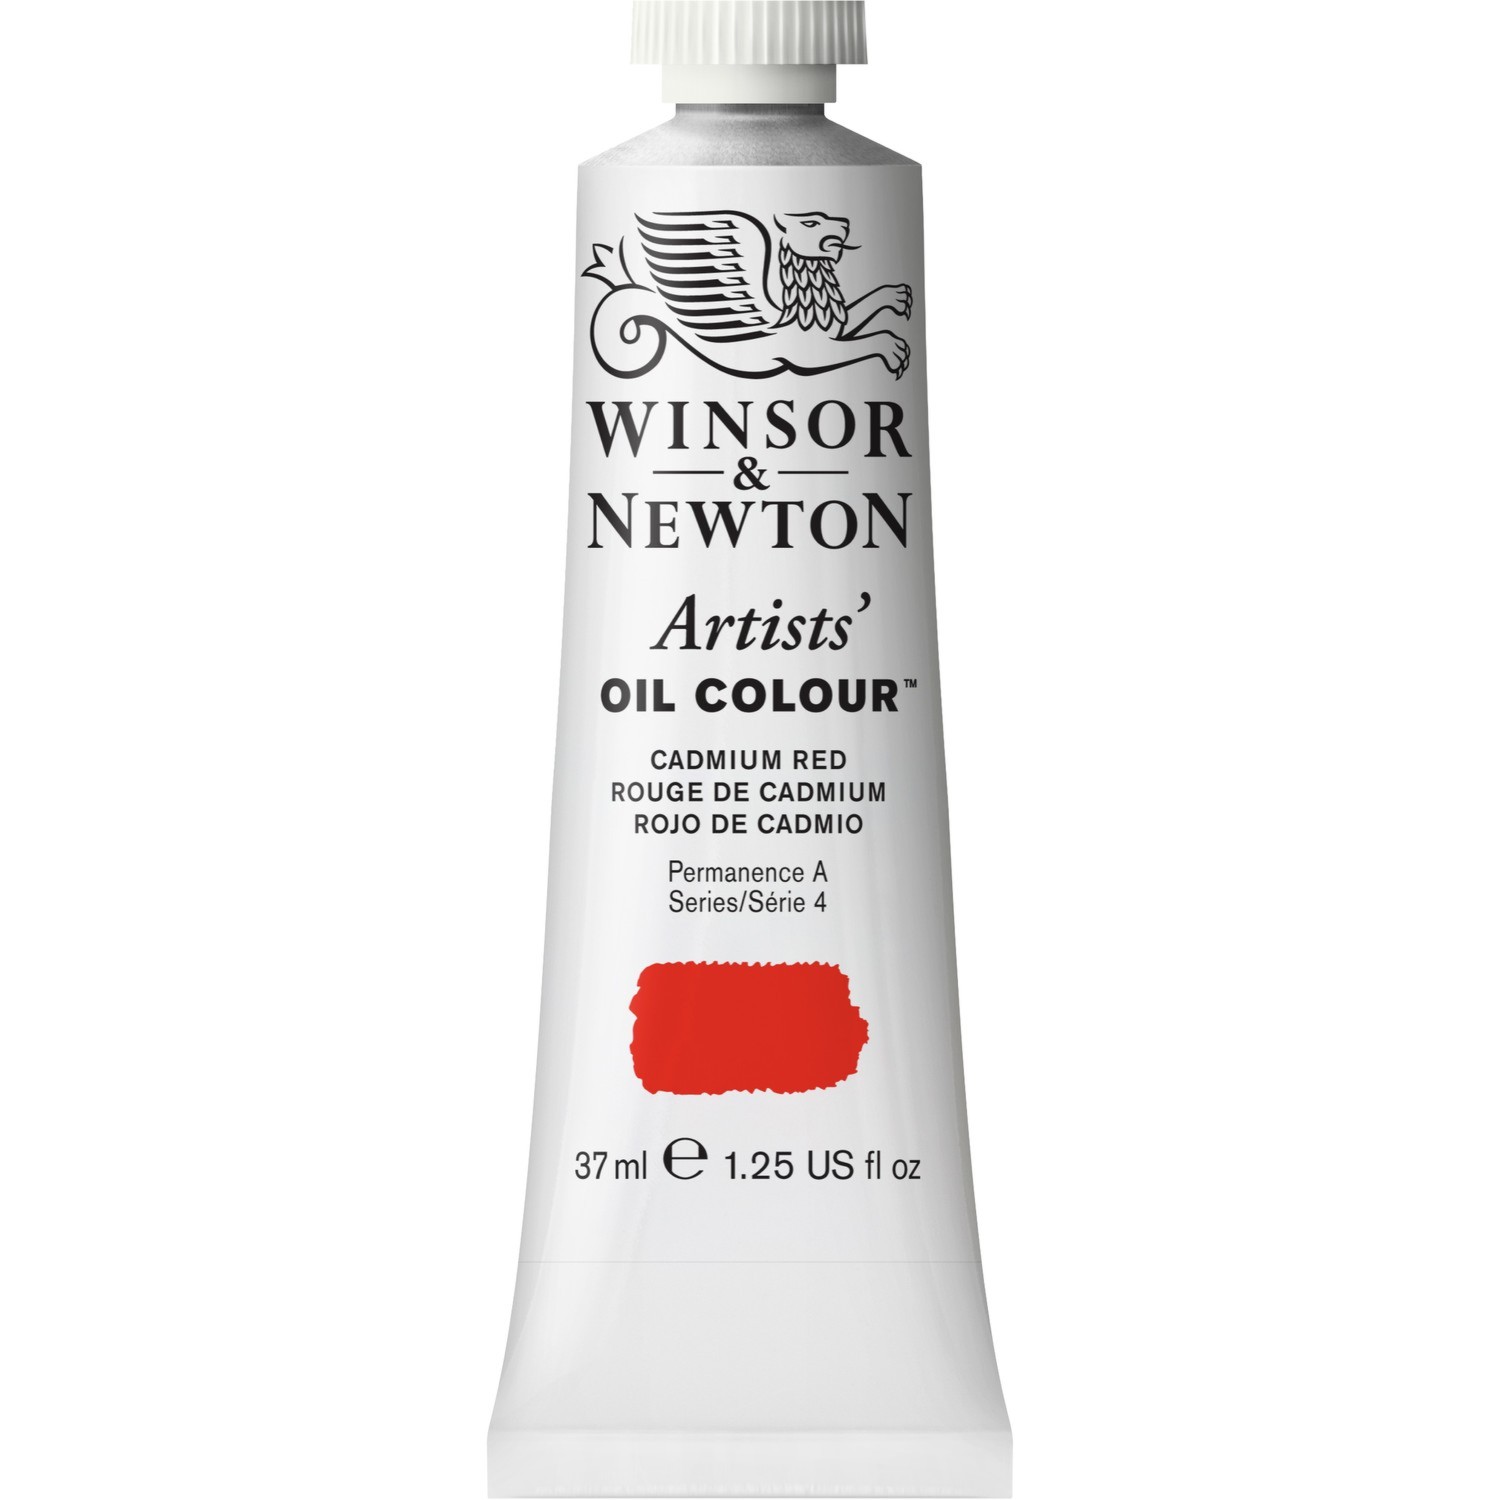 Winsor and Newton 37ml Artists' Oil Colours - Cadmium Red Image 1